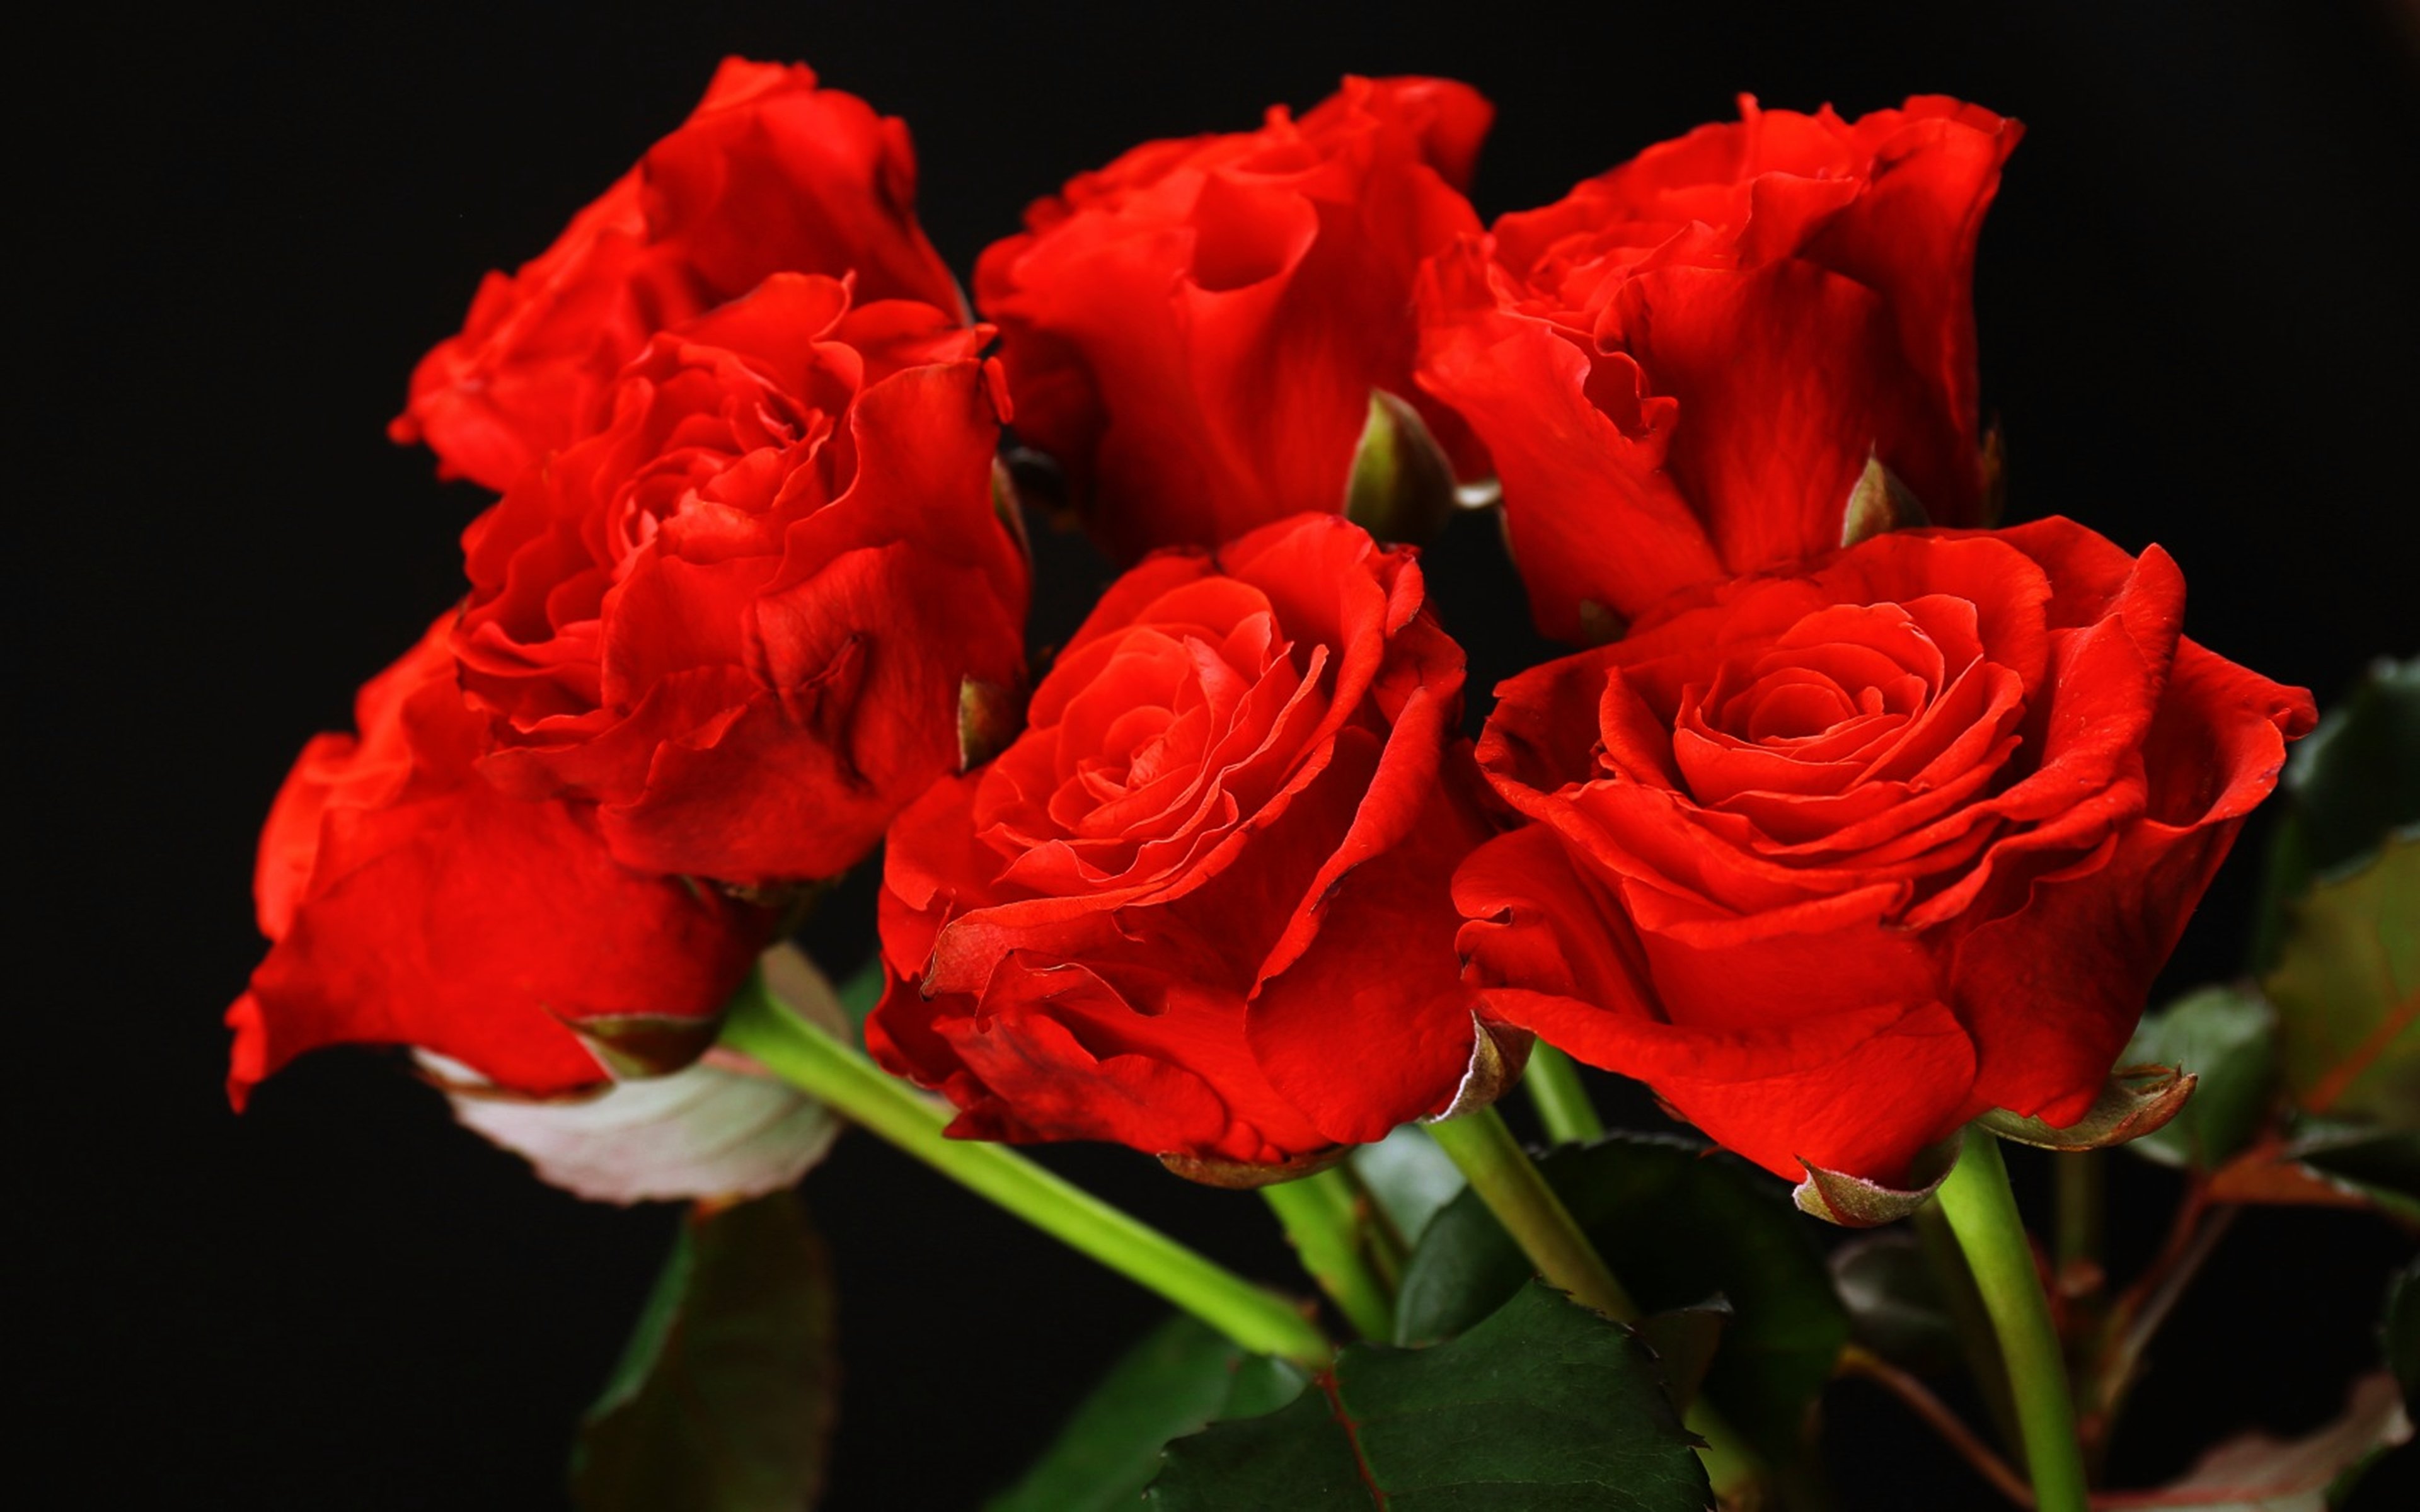 red, Roses, Flower, Bouquet, Love, Romance, Emotions, Girls, Lovers, Couples, Woman, Happy ...